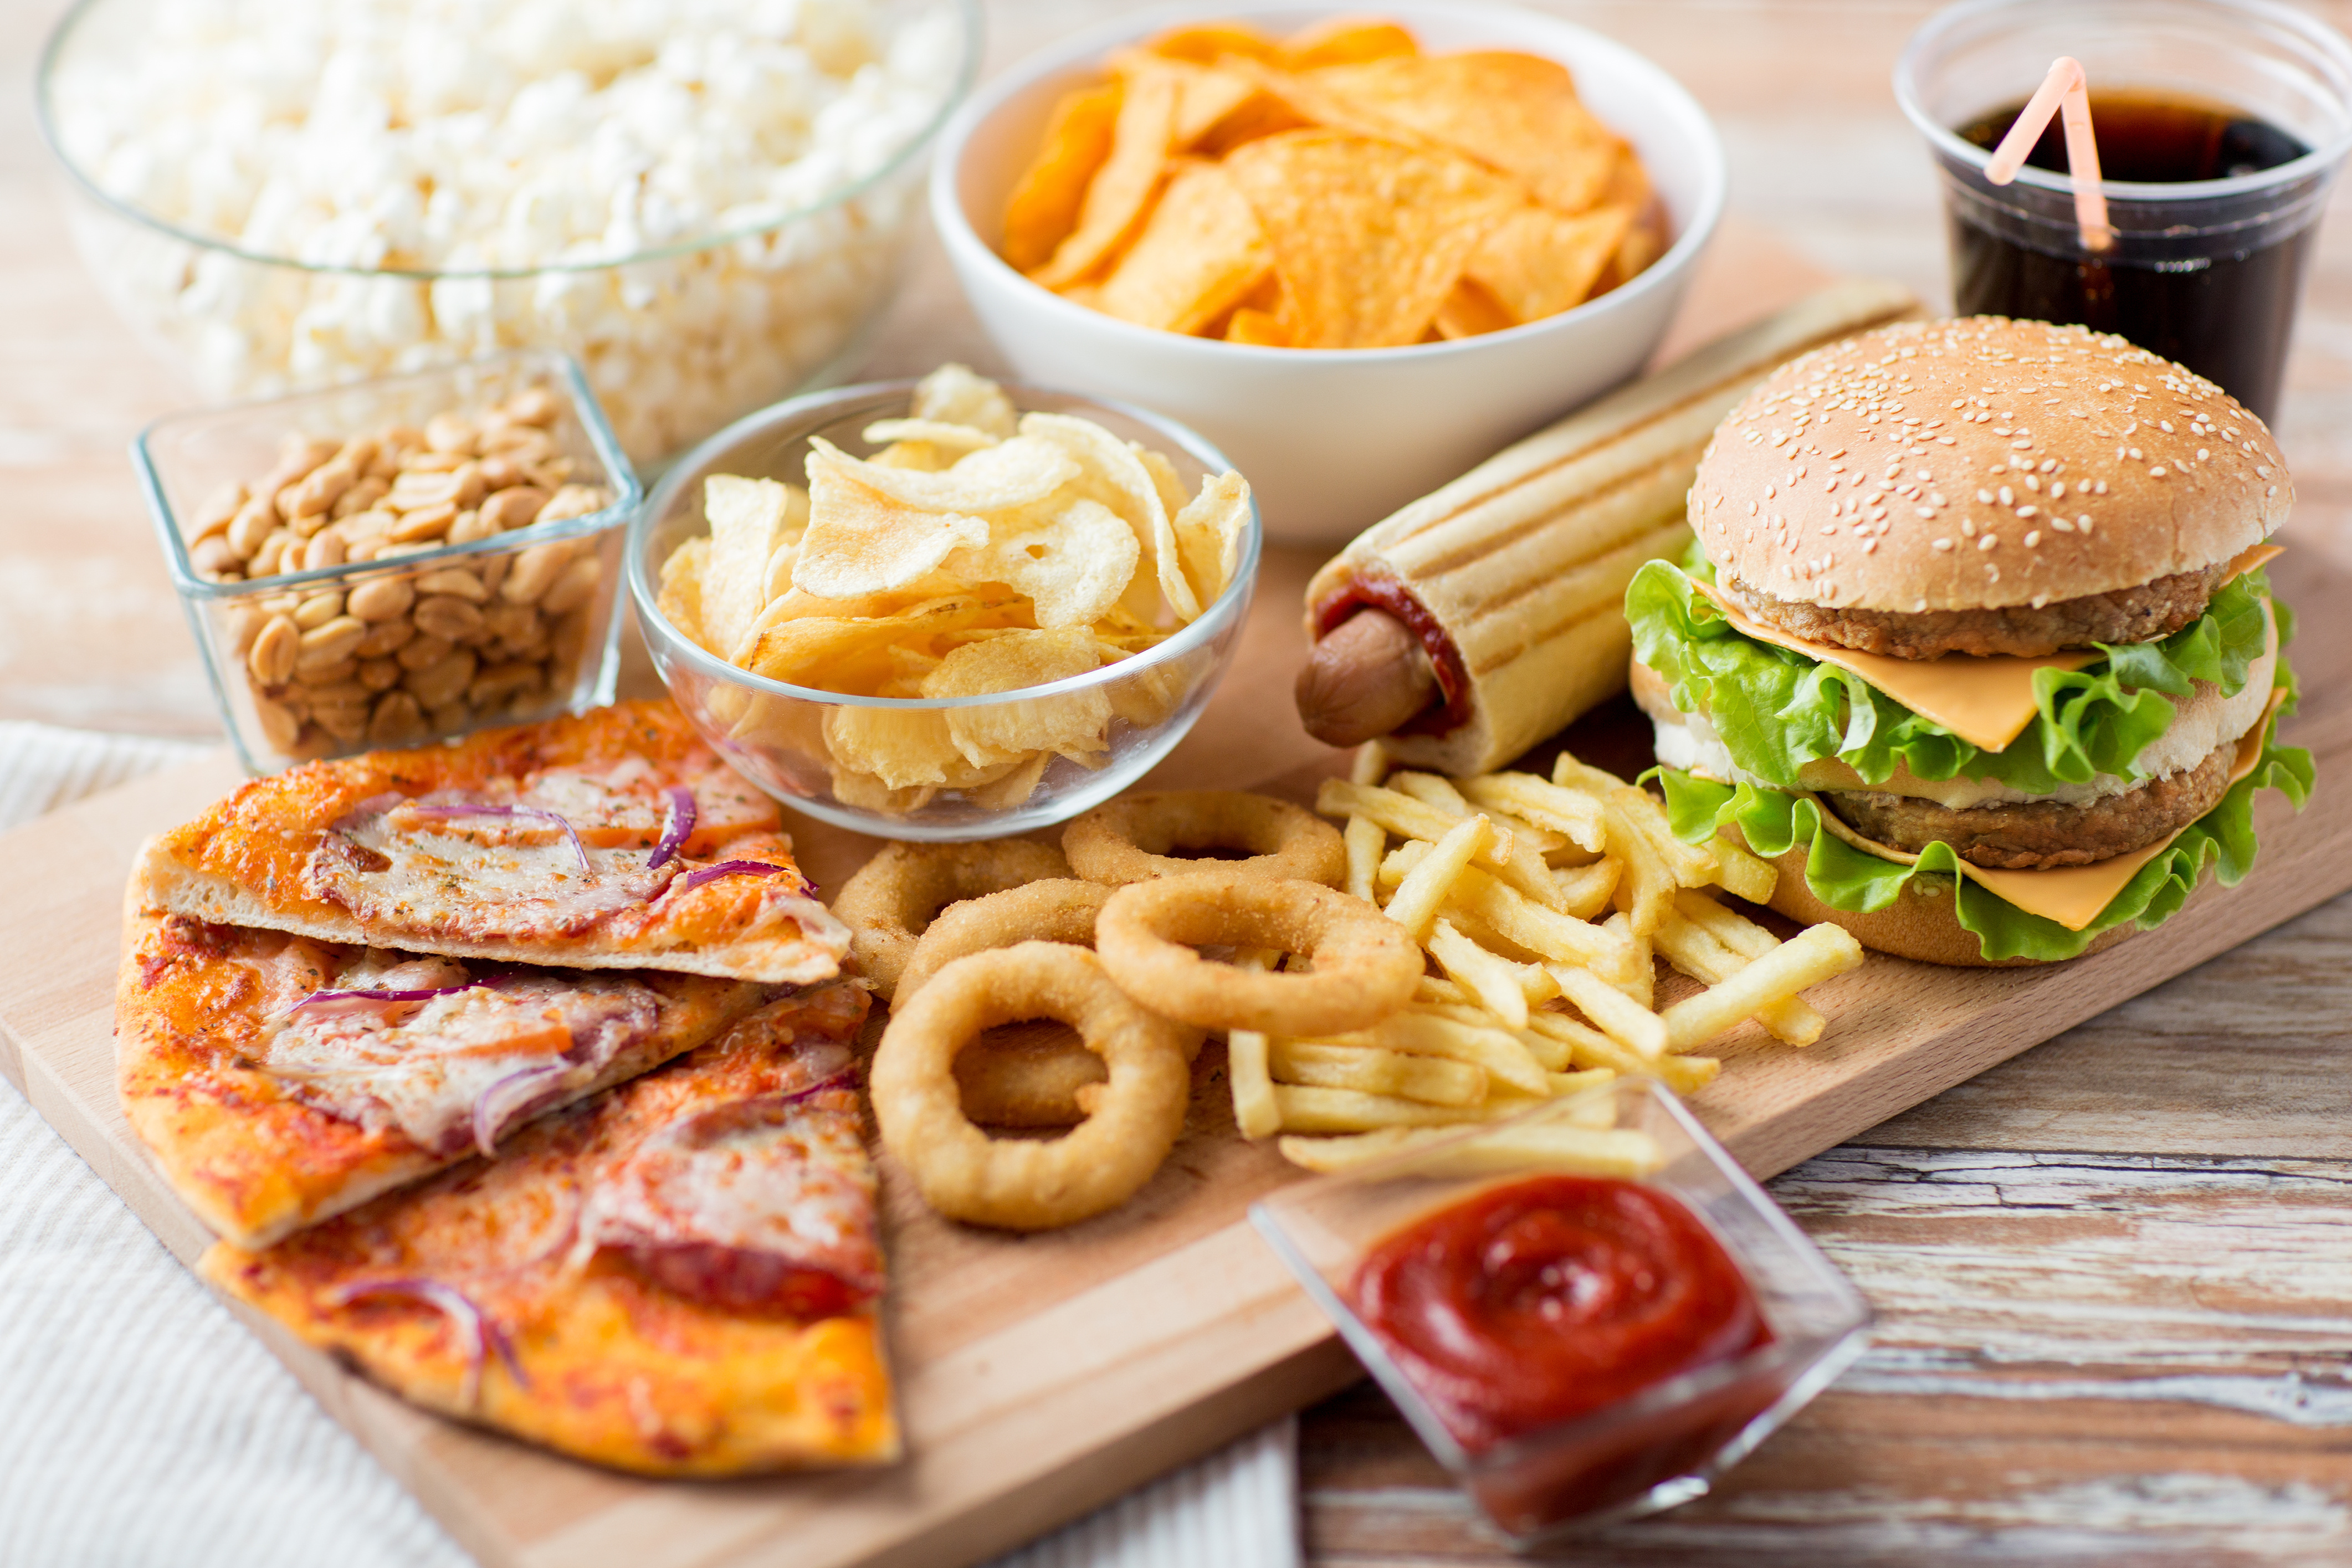 What is Junk Food?